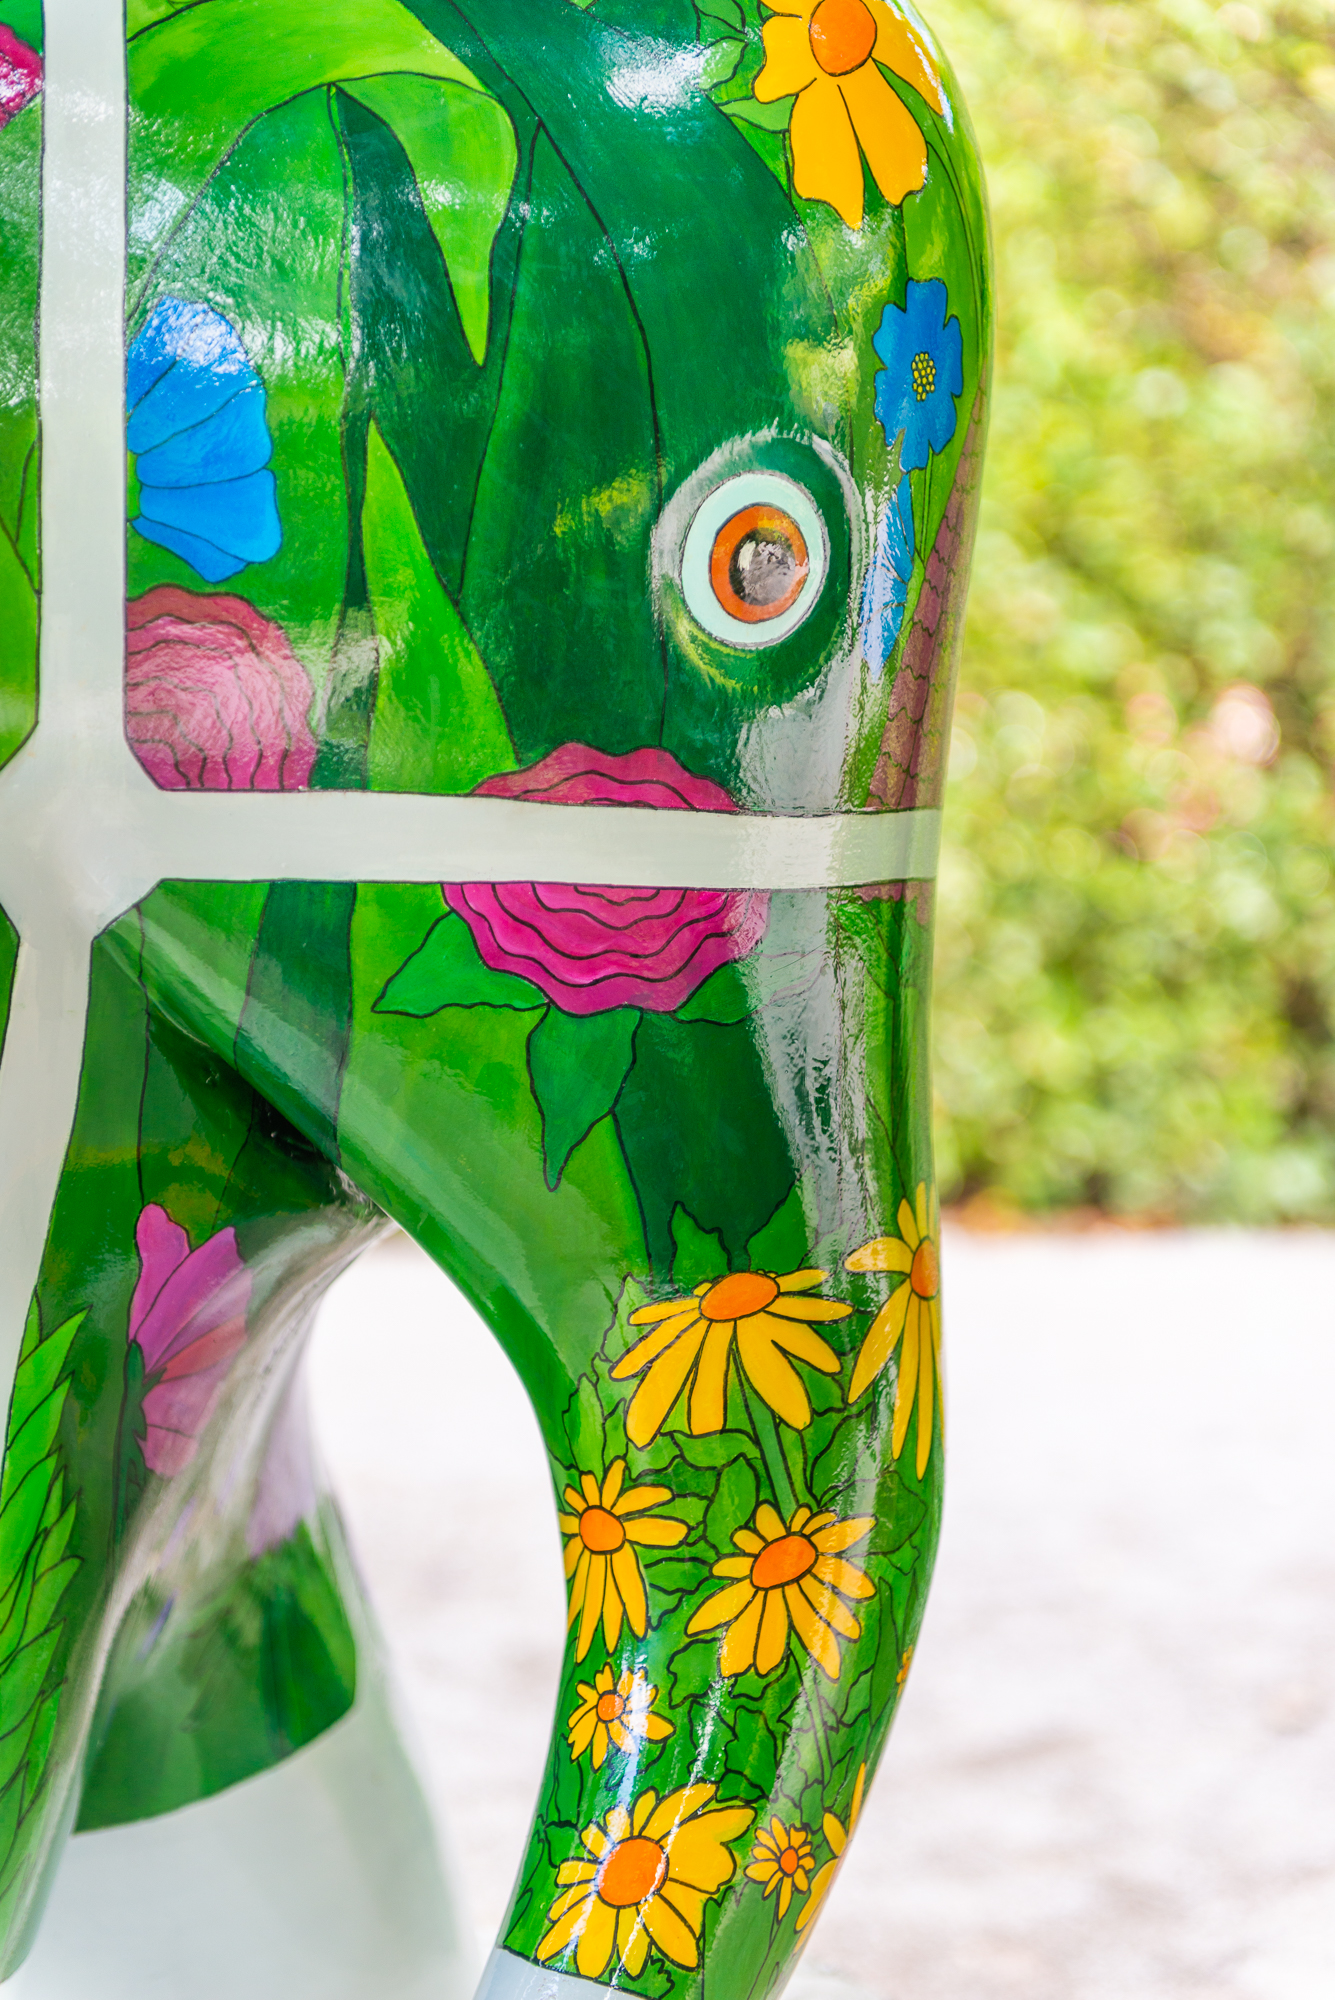 'Blooming Greenhouse' by Leah Hayler. Sponsored by St Luke's Hospice Plymouth - Image 3 of 13